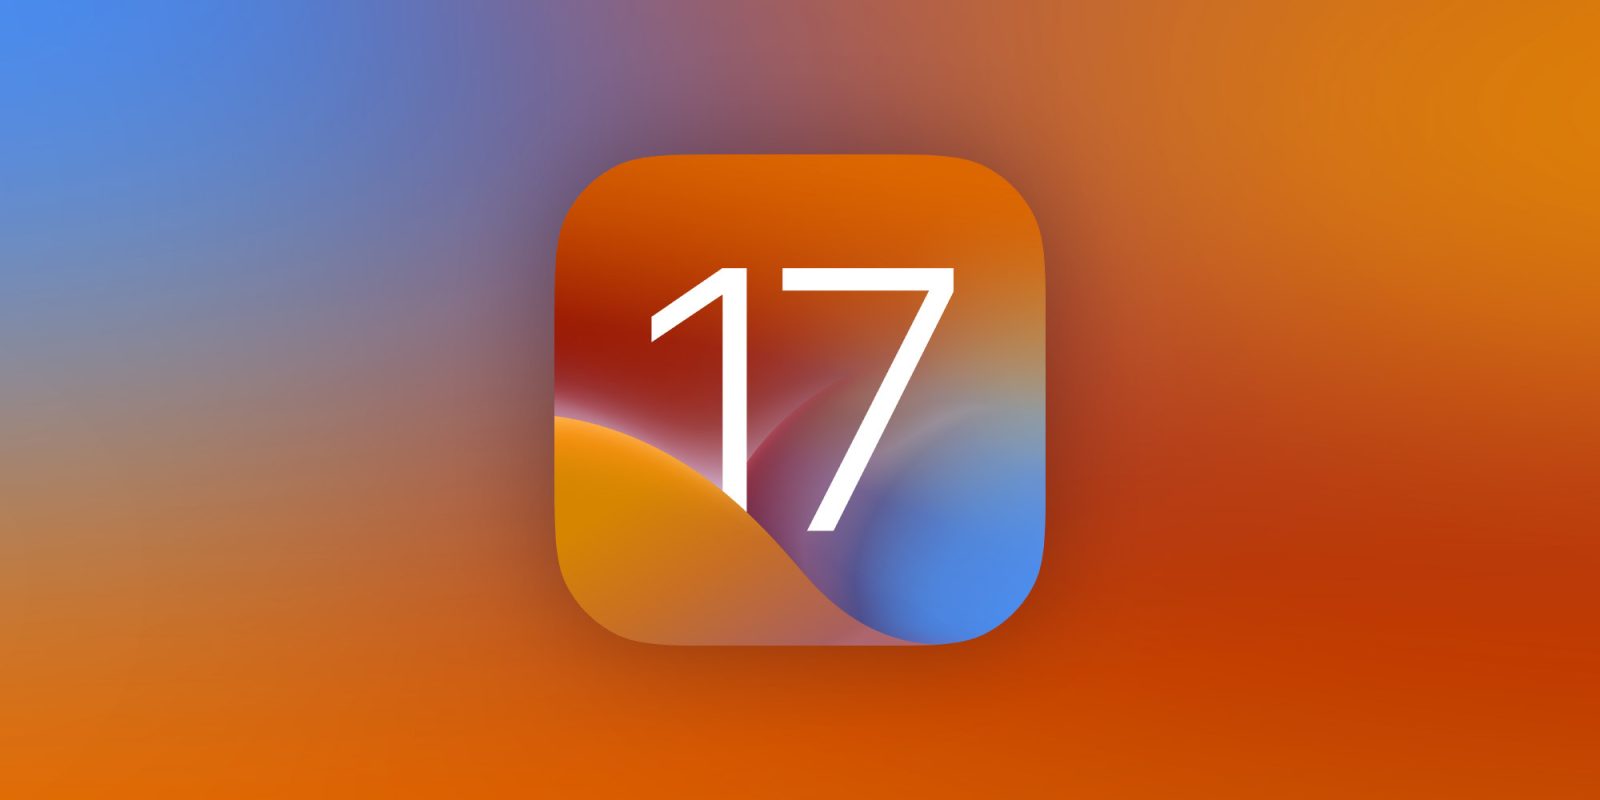 iOS 17 New features, release date, and more 9to5Mac